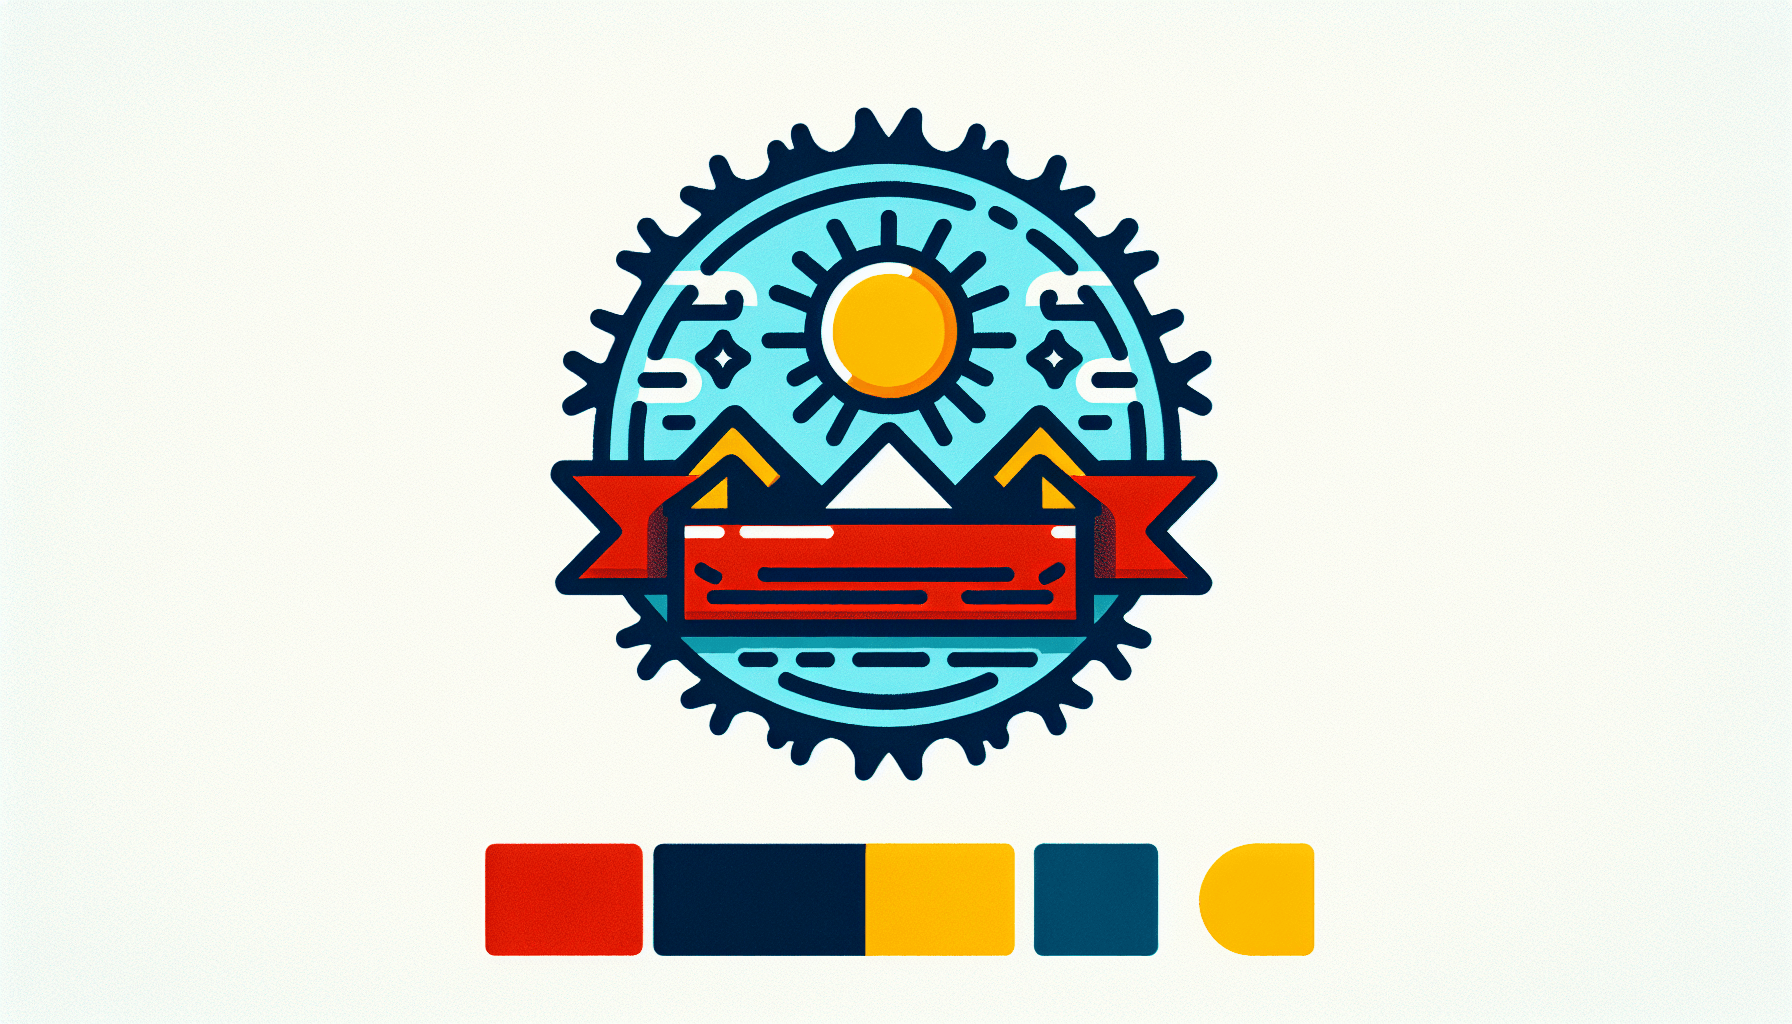 Badge in flat illustration style and white background, red #f47574, green #88c7a8, yellow #fcc44b, and blue #645bc8 colors.